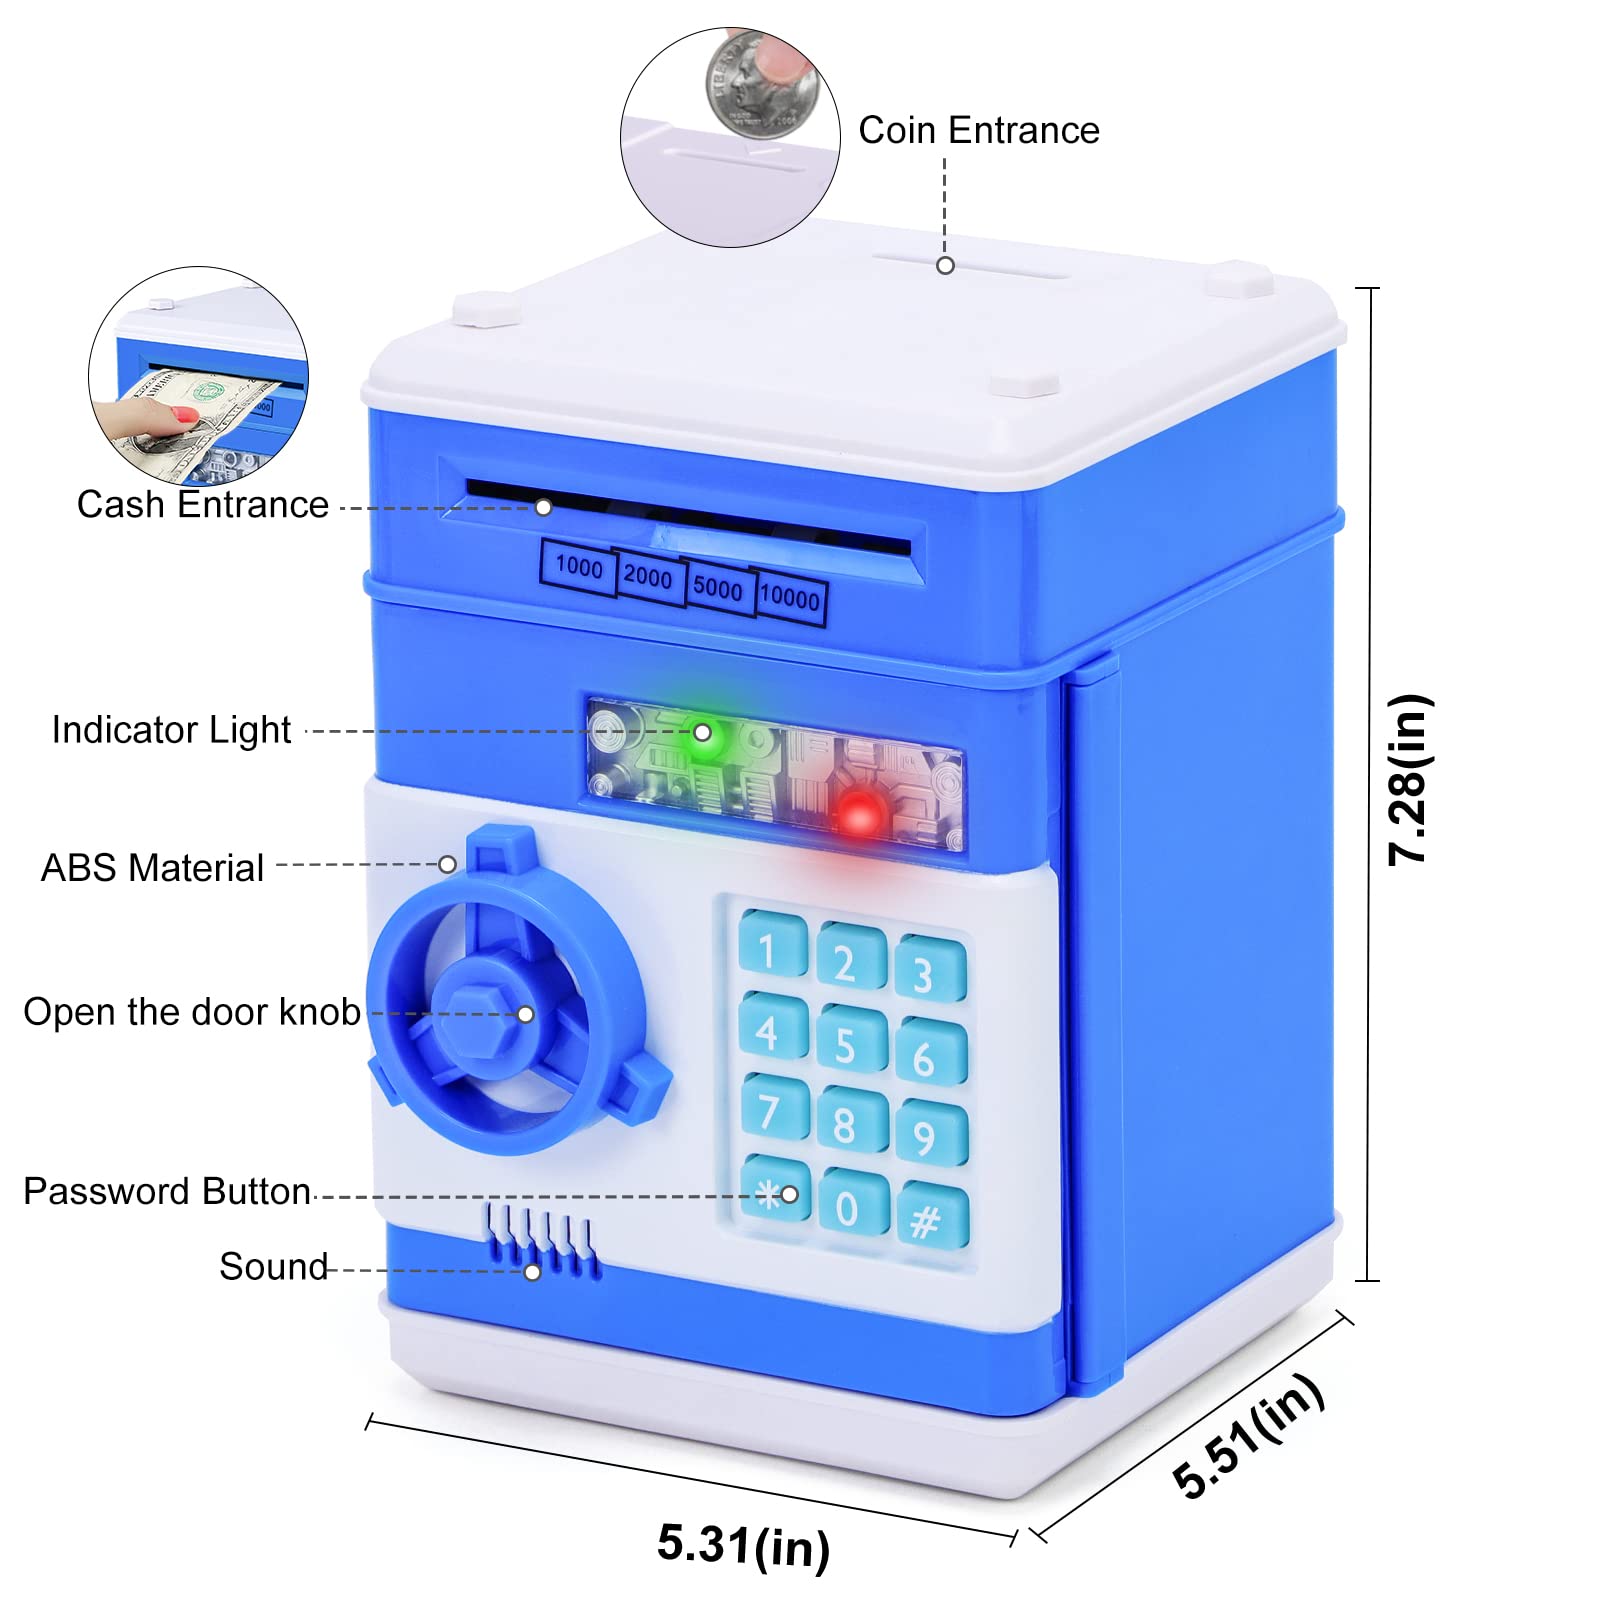 Safe Coin Bank Birthday Gift Toys for 3-12 Year Old Girl Boy, Refasy Children Fun Toys 8-12 Kids ATM Machine with Card Money for Cash Electronic Banks Box Blue